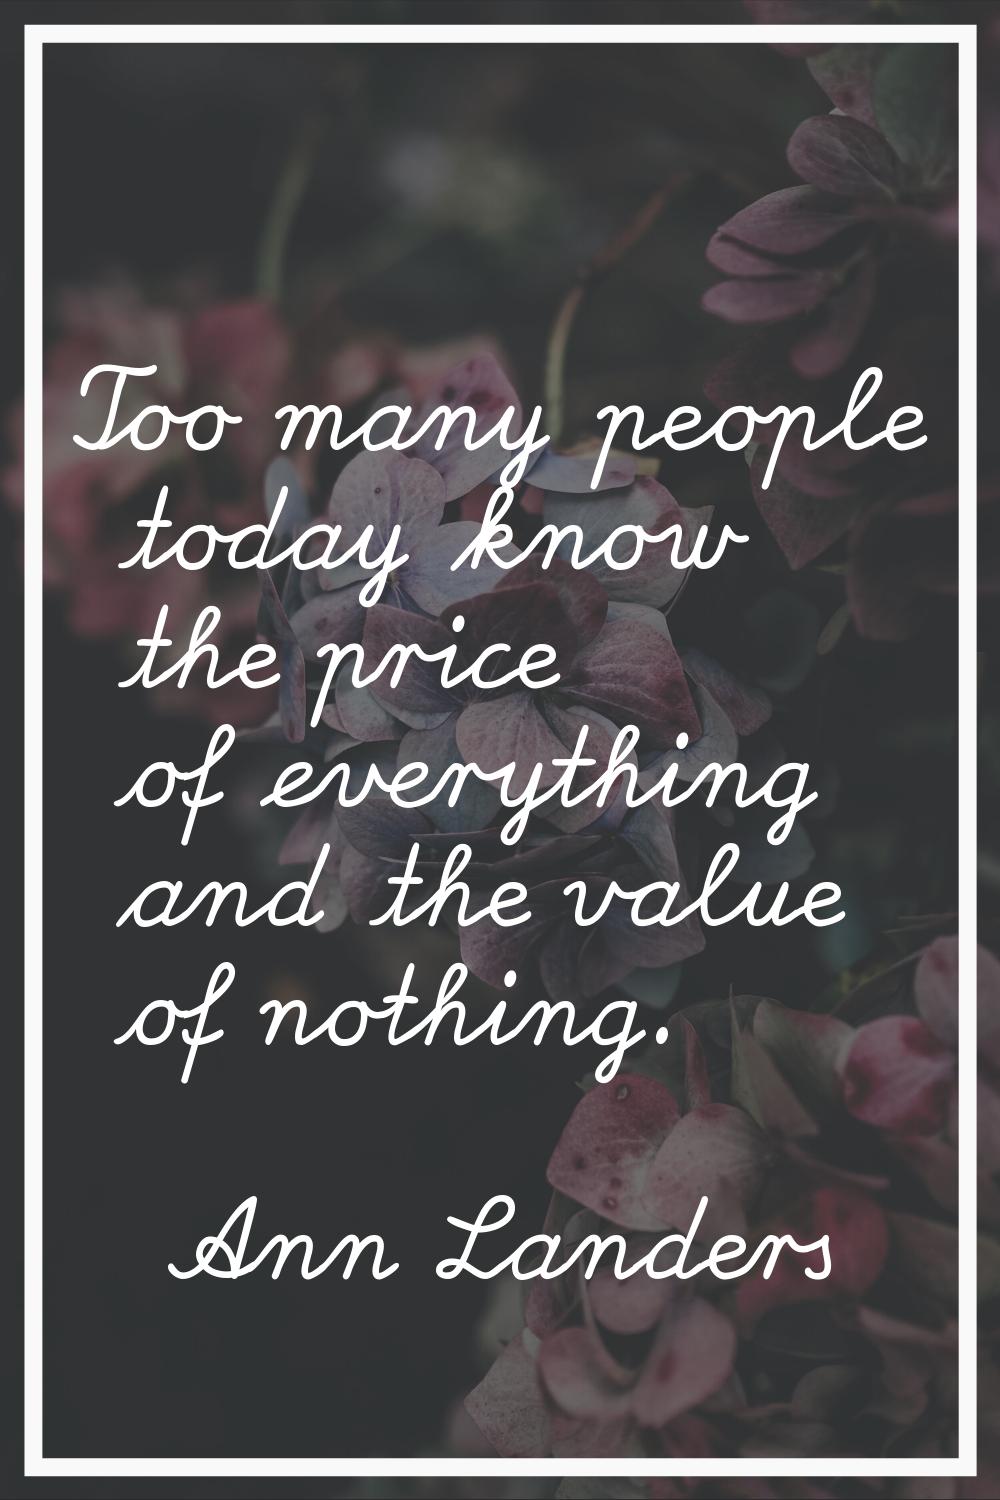 Too many people today know the price of everything and the value of nothing.